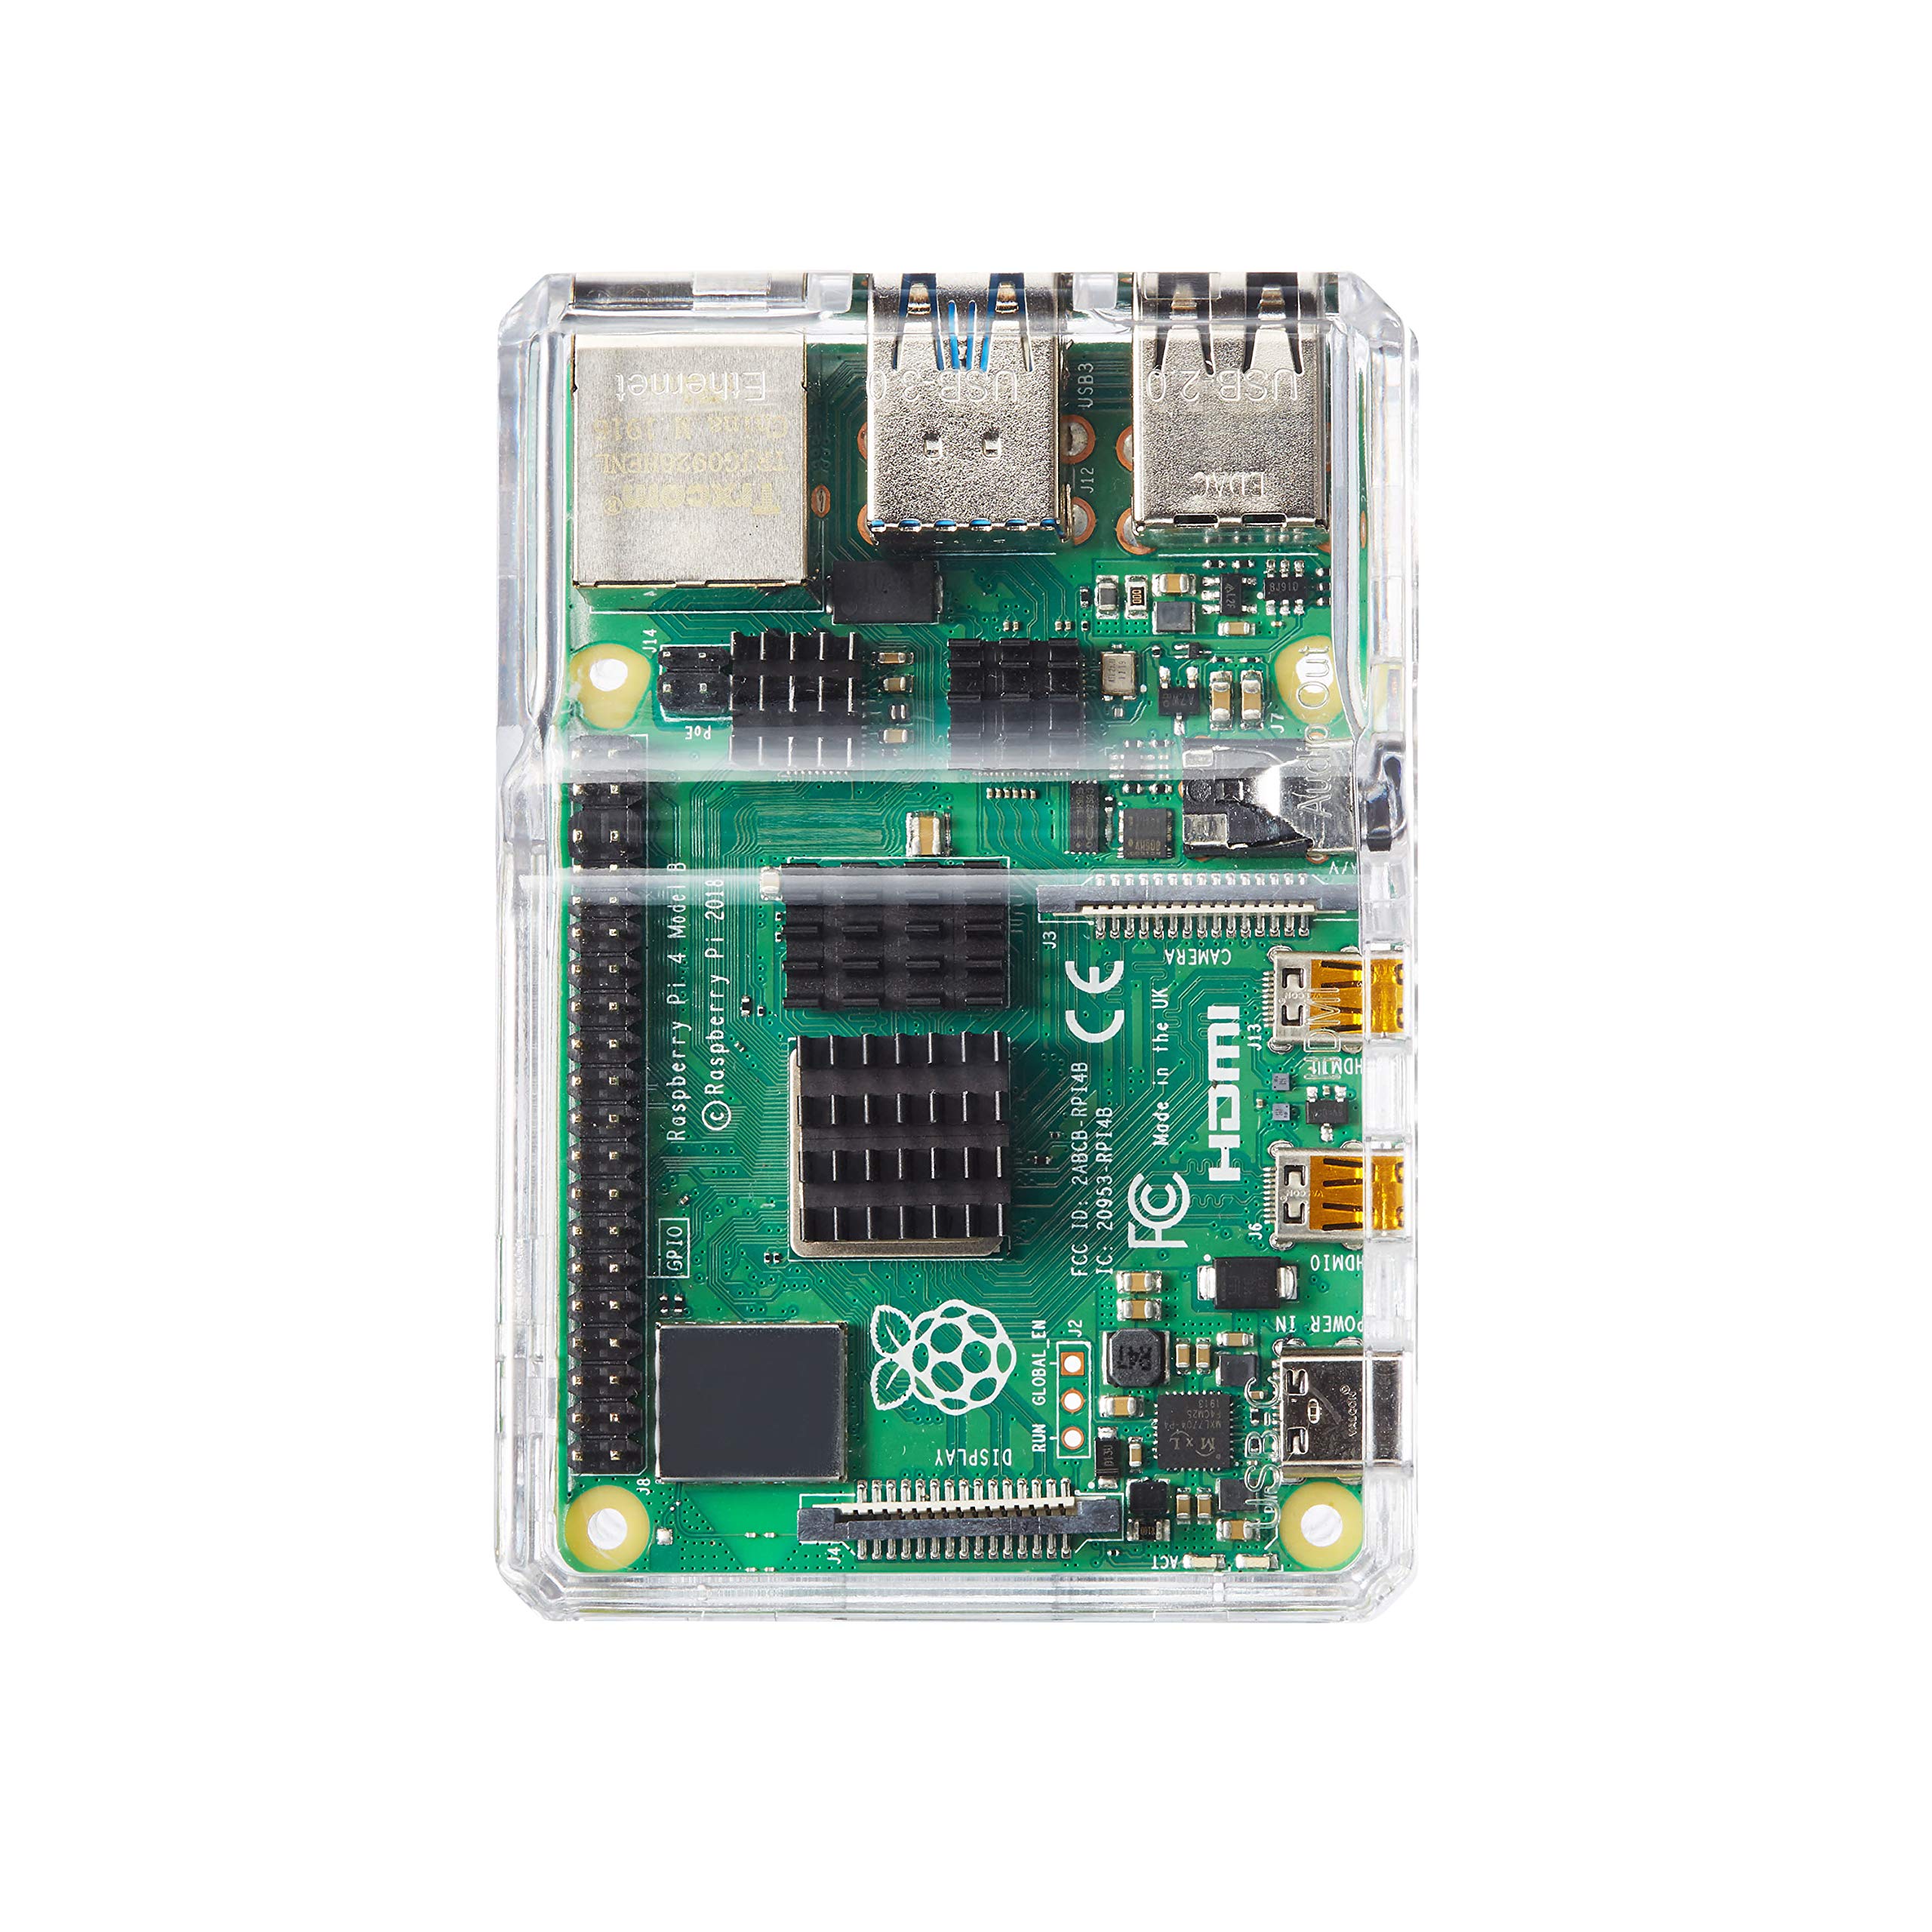 Vilros Clear Transparent Slim Compact Case for Raspberry Pi 4-Includes Sealed and Open Cover Options